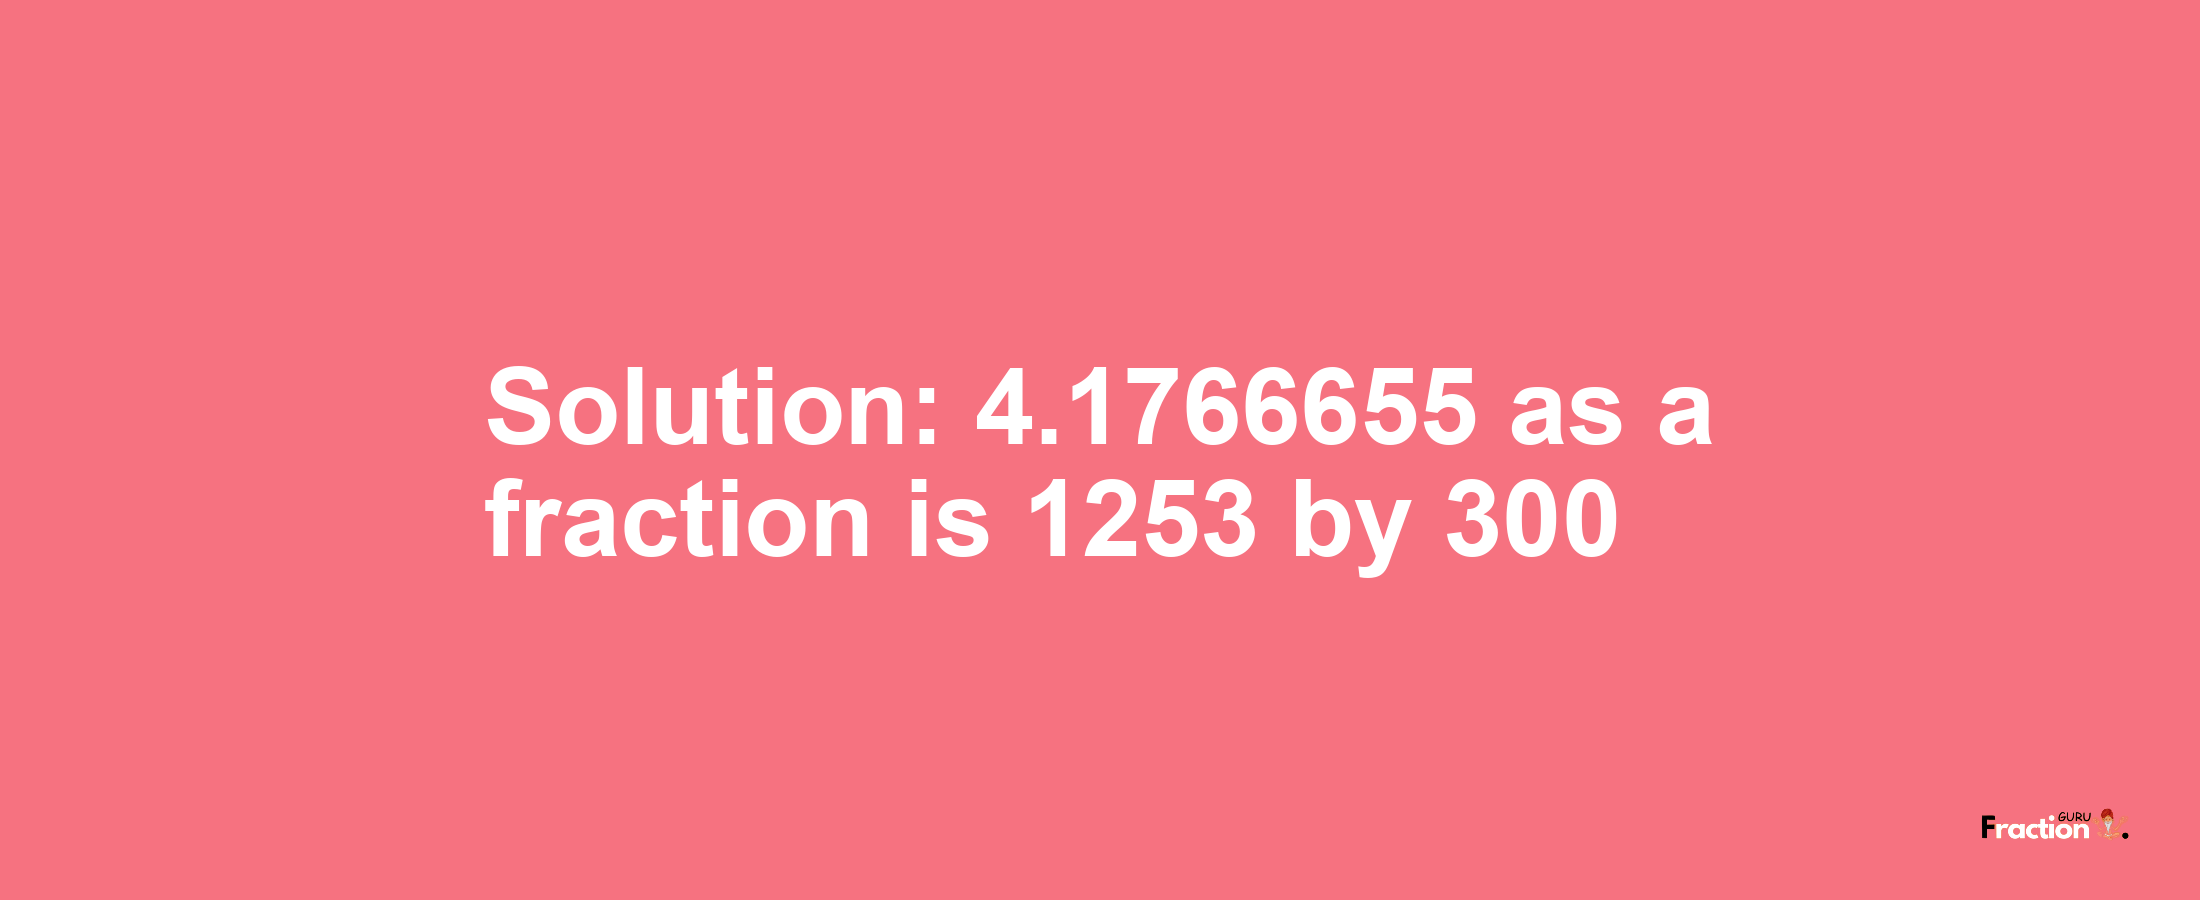 Solution:4.1766655 as a fraction is 1253/300